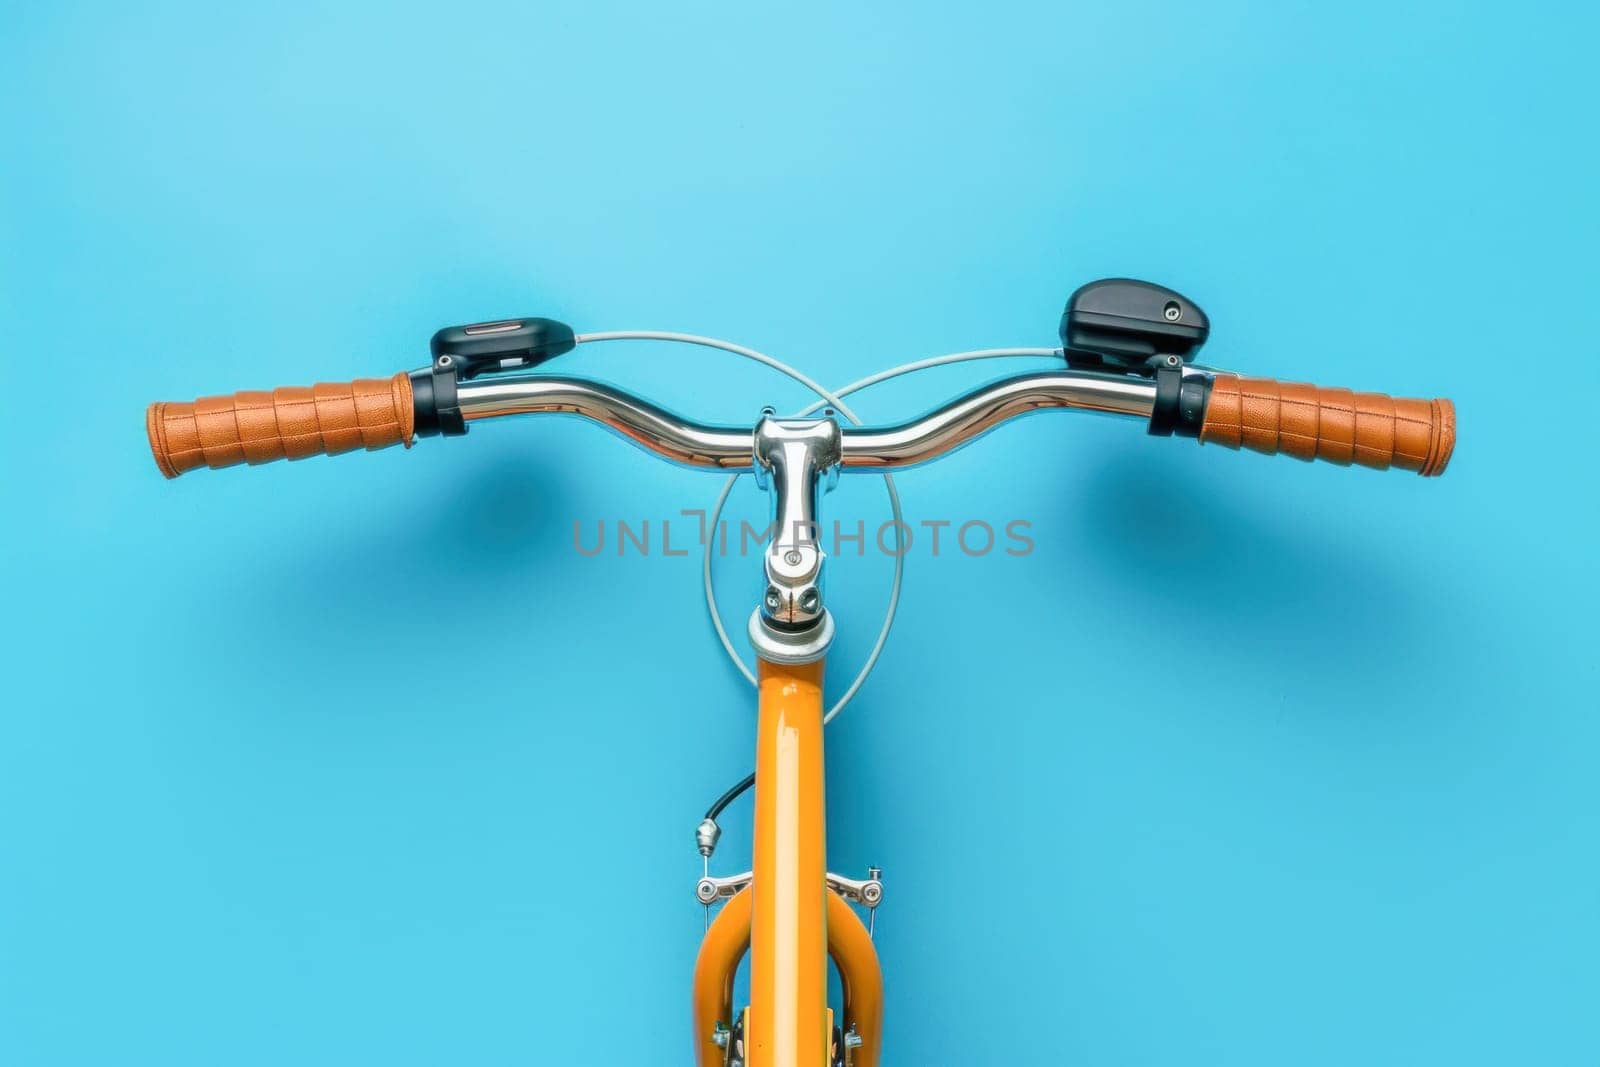 In the image, there is the front of a yellow bicycle with brown handlebars against a blue background